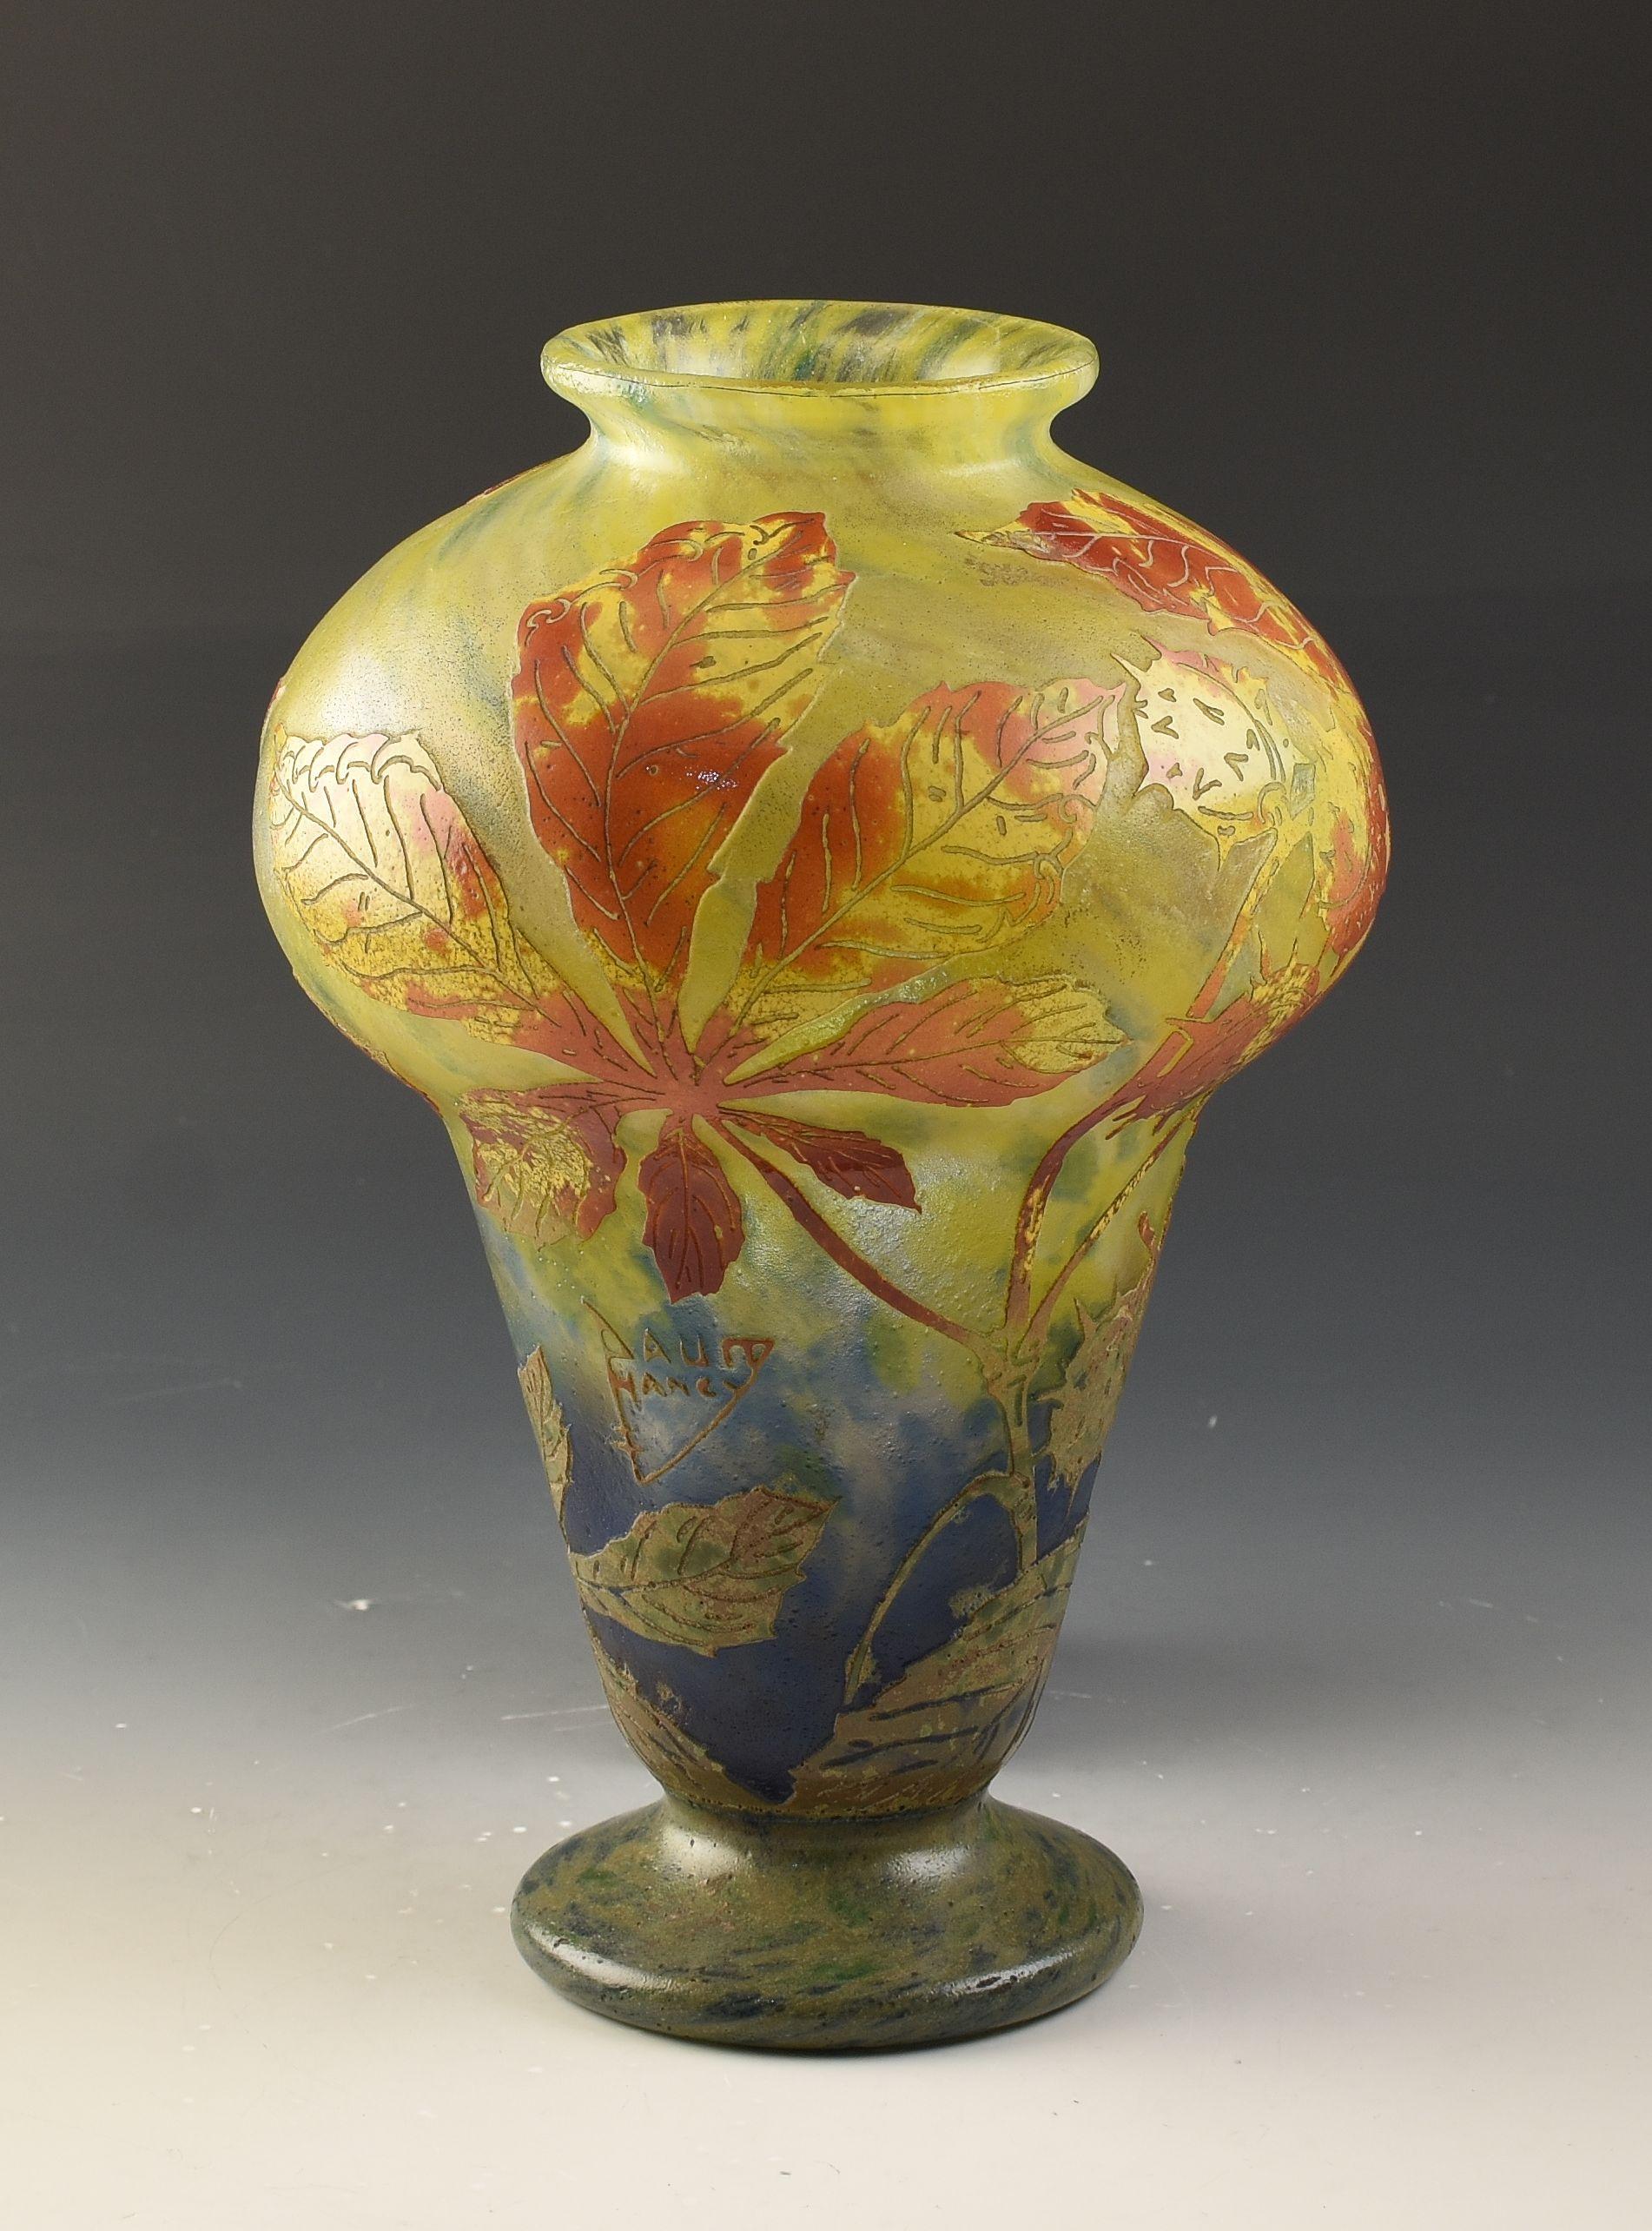 A beautiful Daum cameo glass vase that will date to around 1900. The vase measures 25.5cm in height, is 19.5cm wide and in perfect, original condition.  It is signed to the body, Daum Nancy.